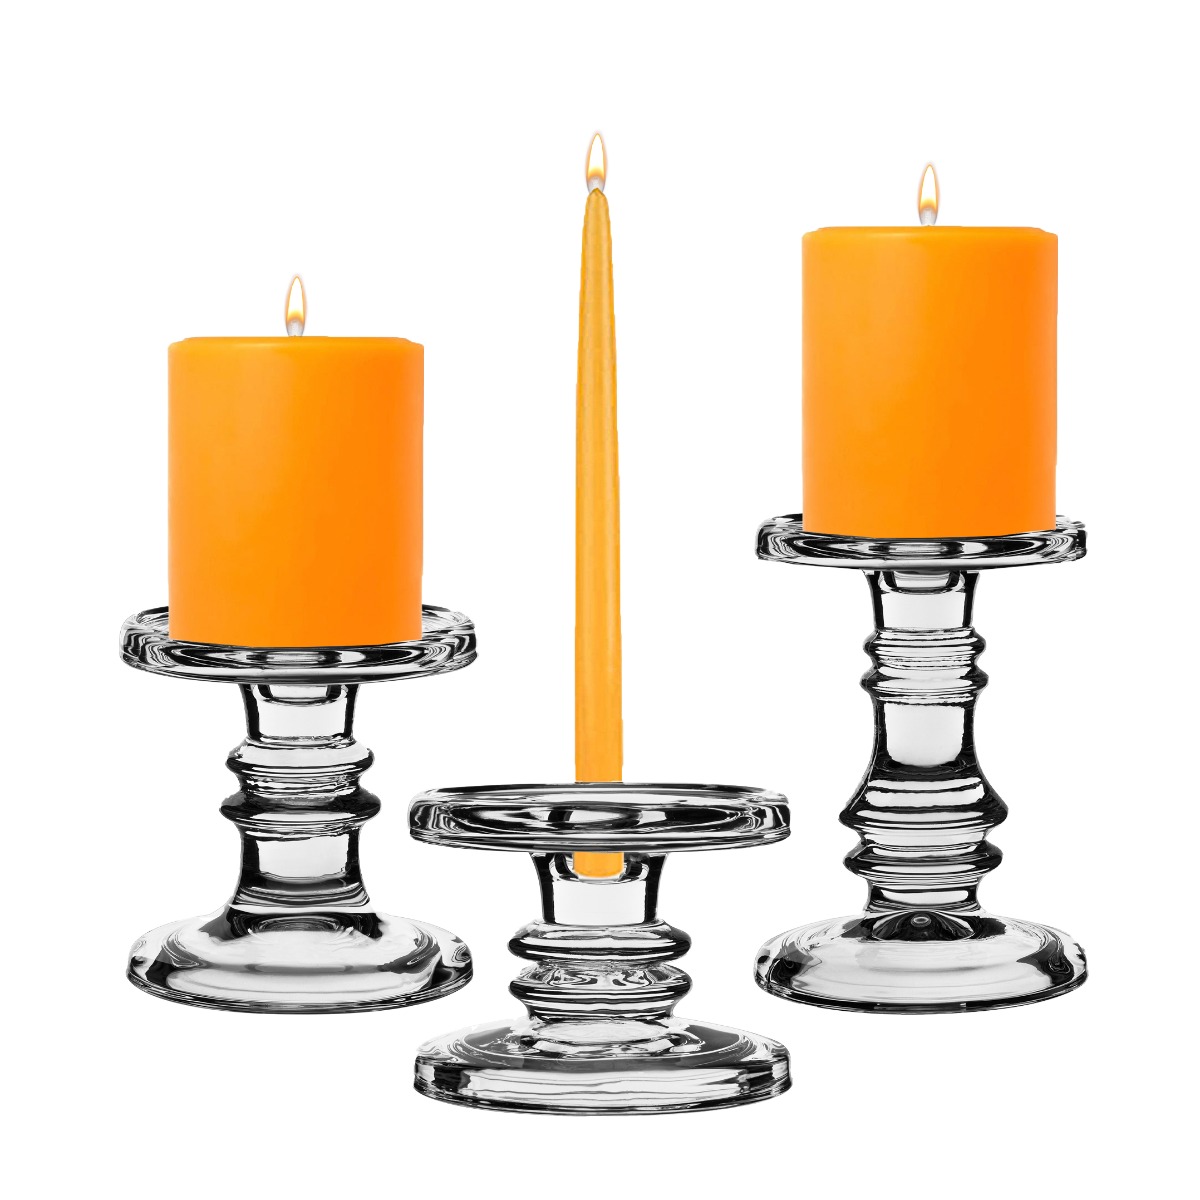 Marzoon 4 x Classic Candle Holder with Plate Base in Set / Candle Holder for Taper Candles in Silver Height 5.5 cm Design 5. Designs to Choose From Variante 5 Silver